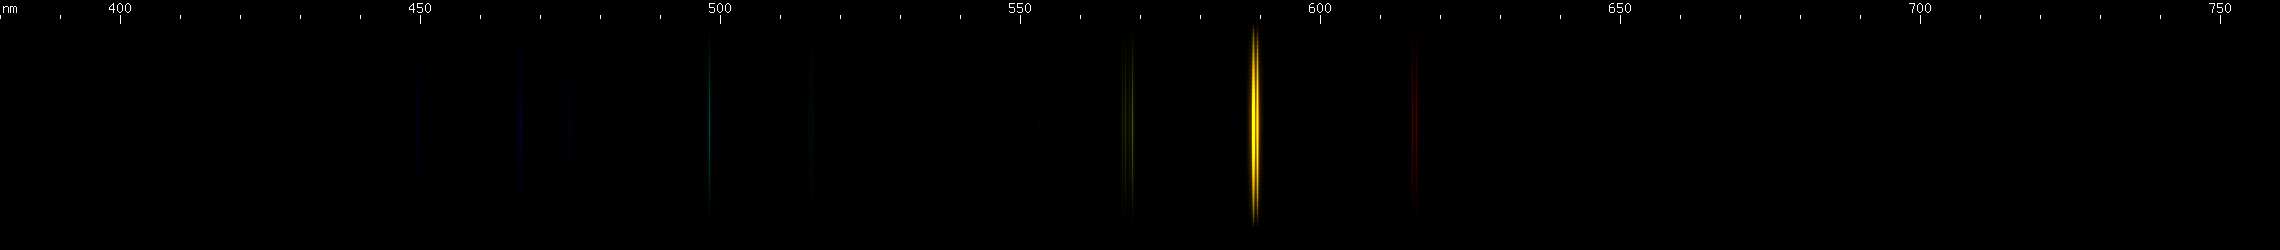 Spectral Lines of Sodium